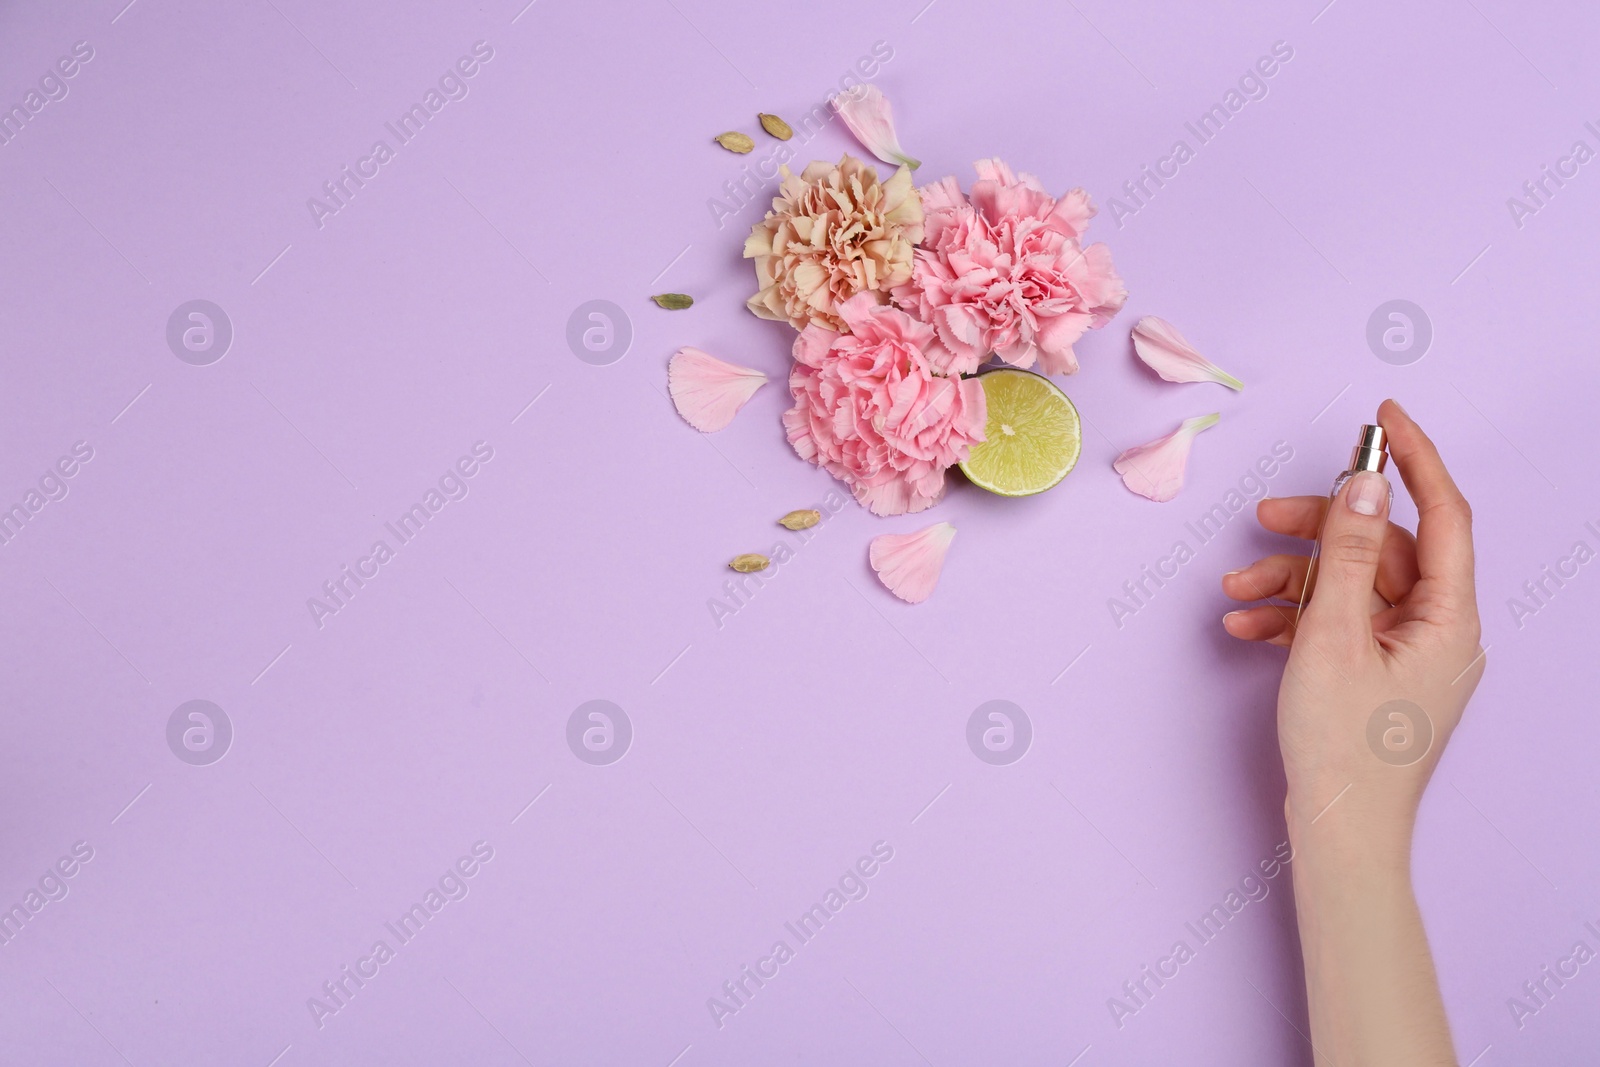 Photo of Top view of woman spraying perfume on lilac background, flowers and lime representing aroma. Space for text